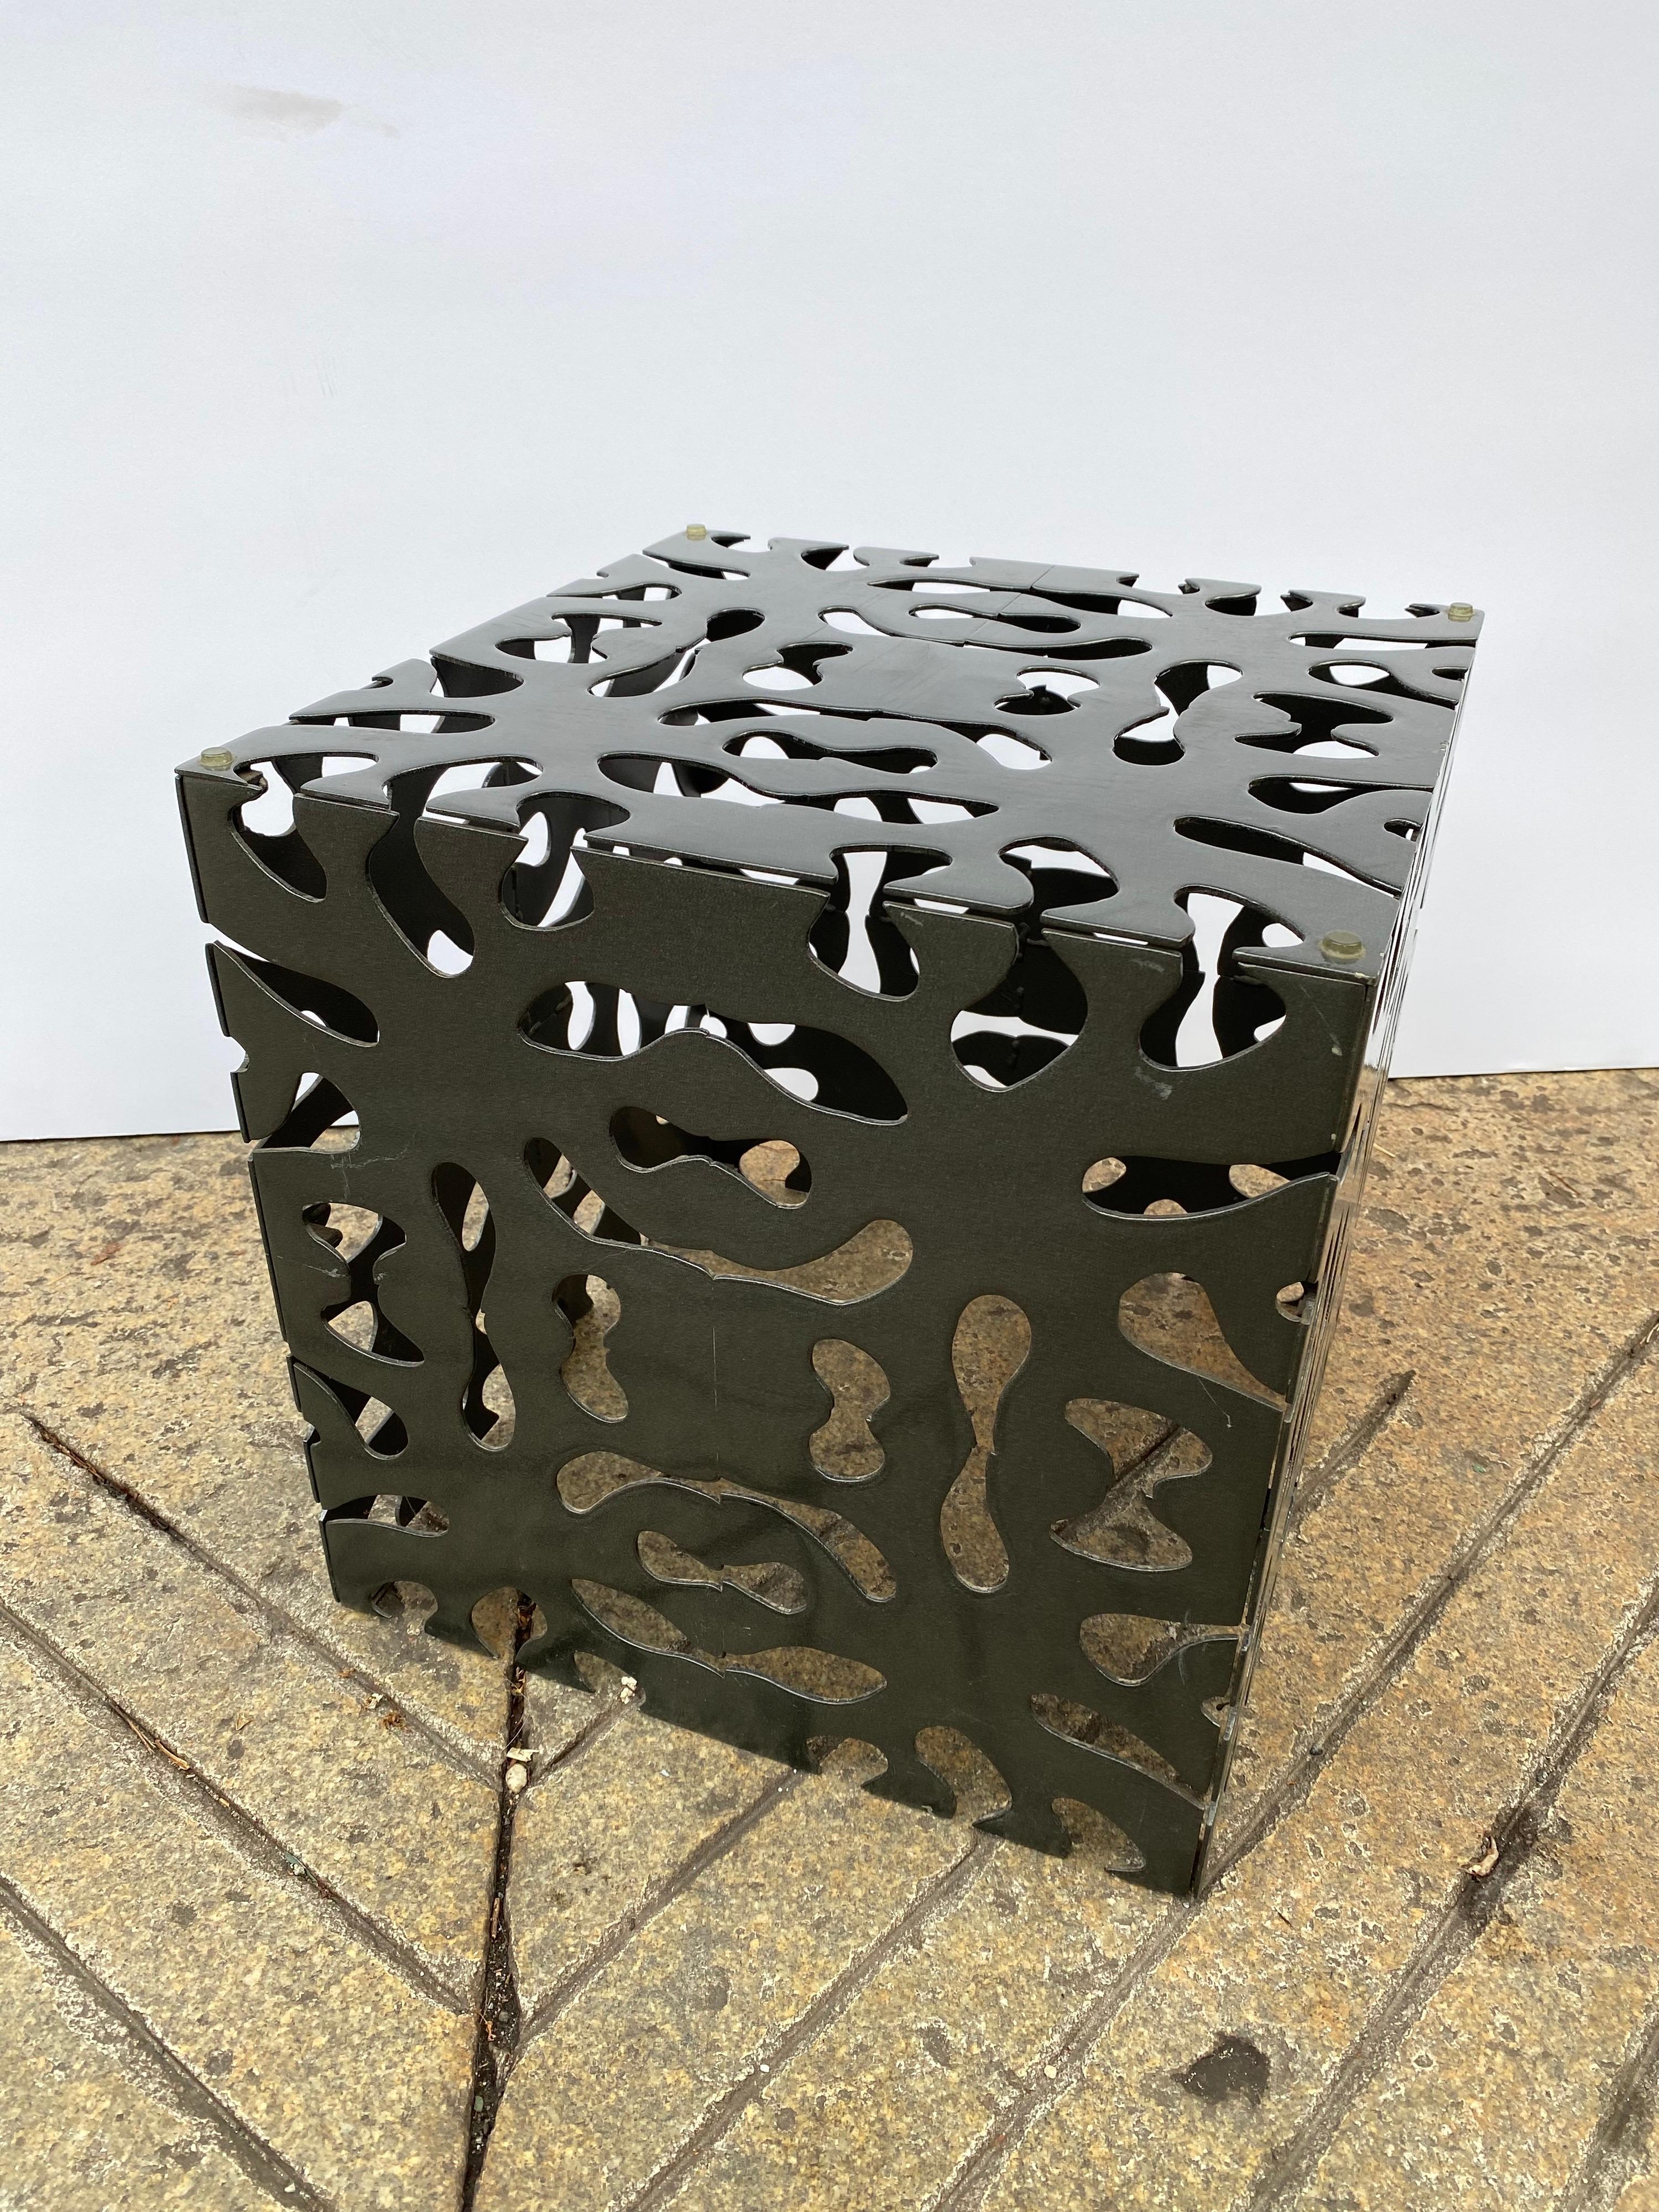 Tri-Mark Reticulated Metal Cube Table 1